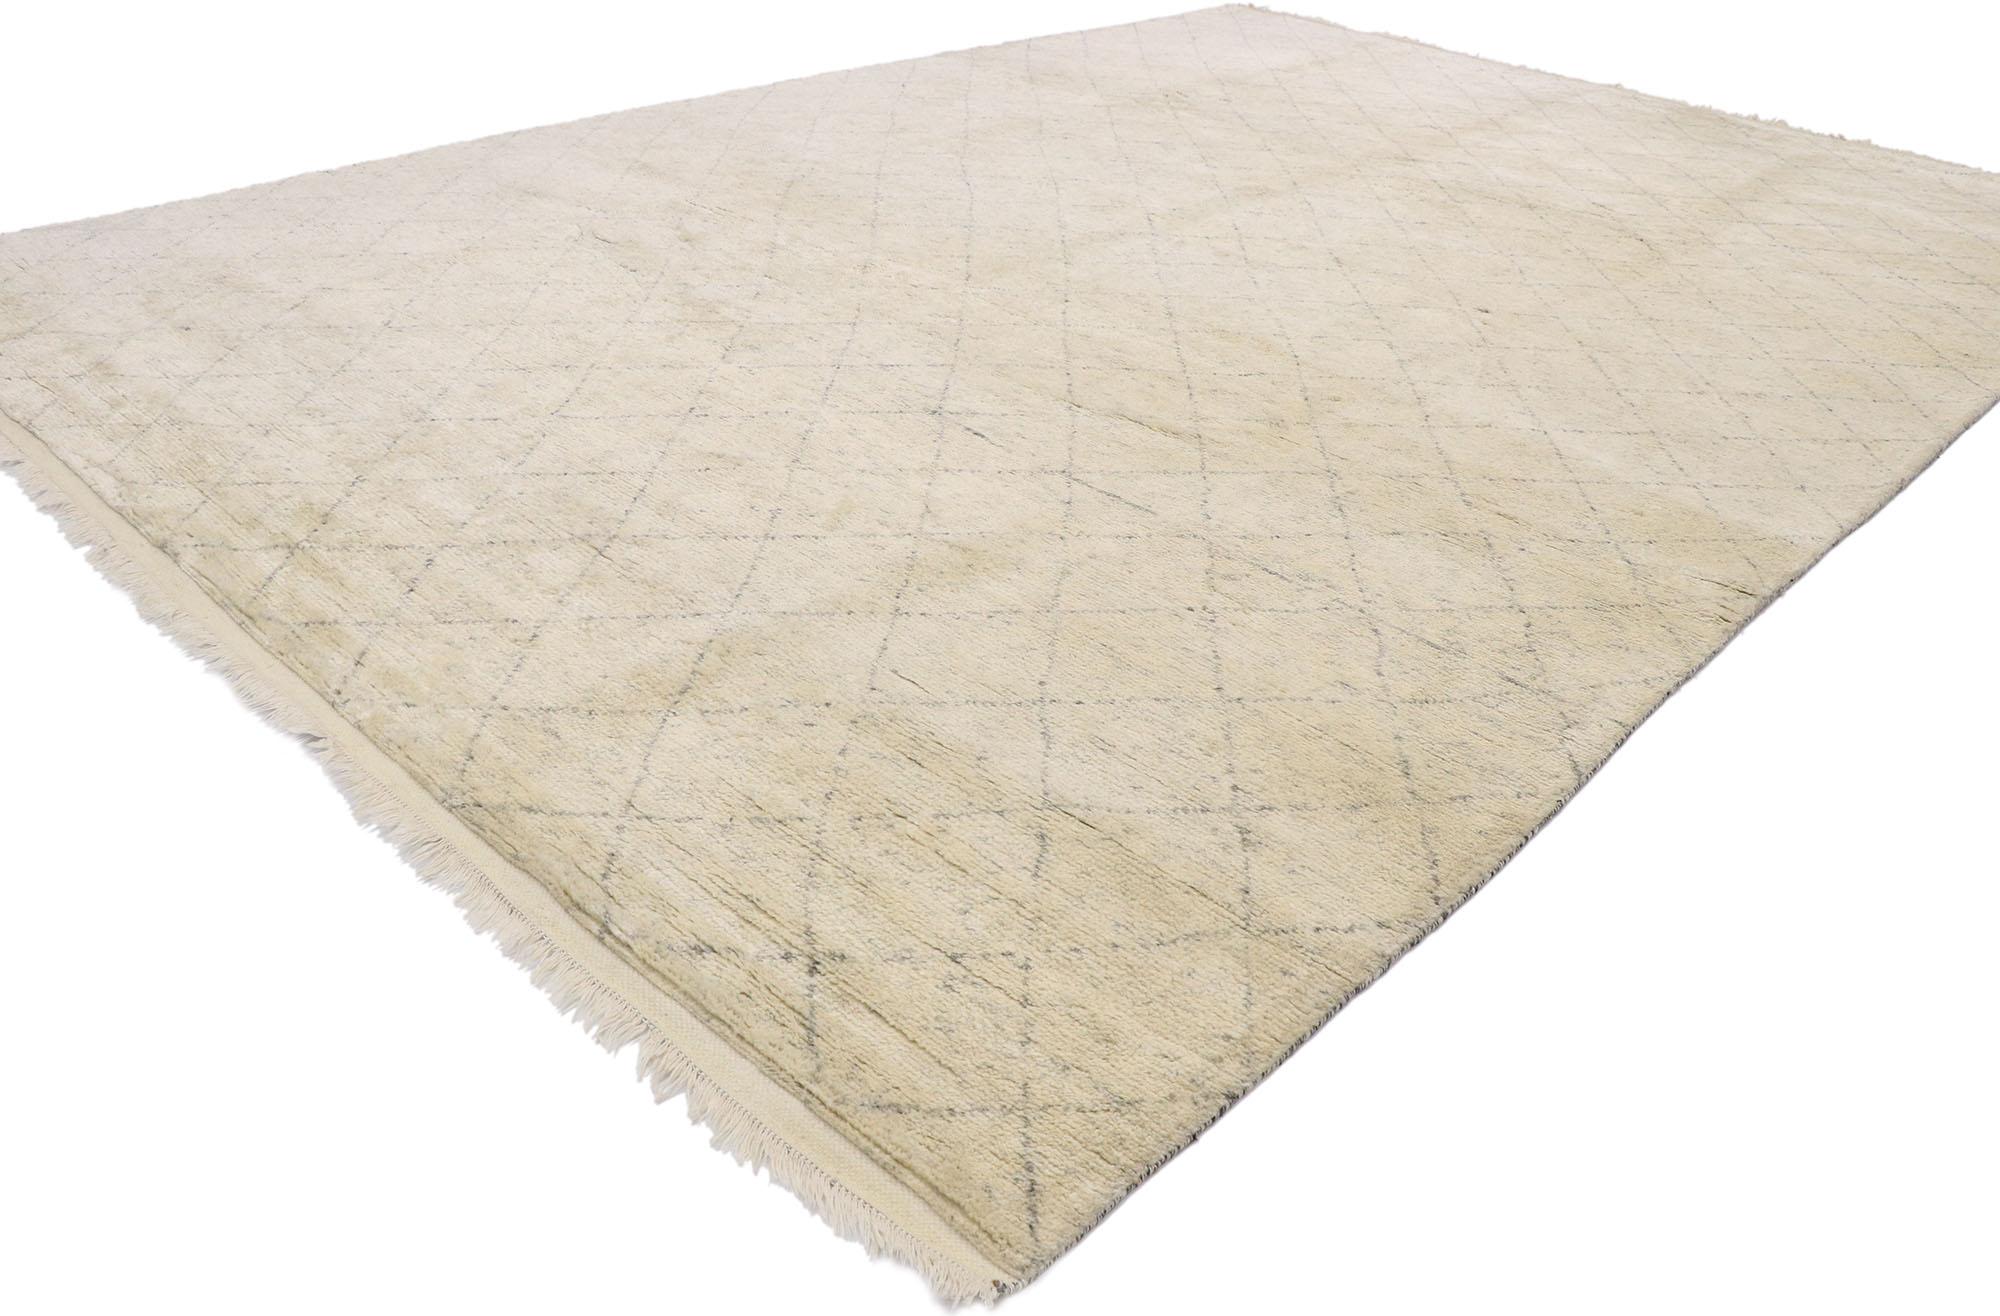 30581 Neutral Moroccan Rug with Organic Modern Style, 09'11 x 14'03.
Reflecting elements of Shibui and Organic Modern style, this hand knotted wool Moroccan rug emanates ultra cozy. The simple diamond silhouette and neutral colors woven into this